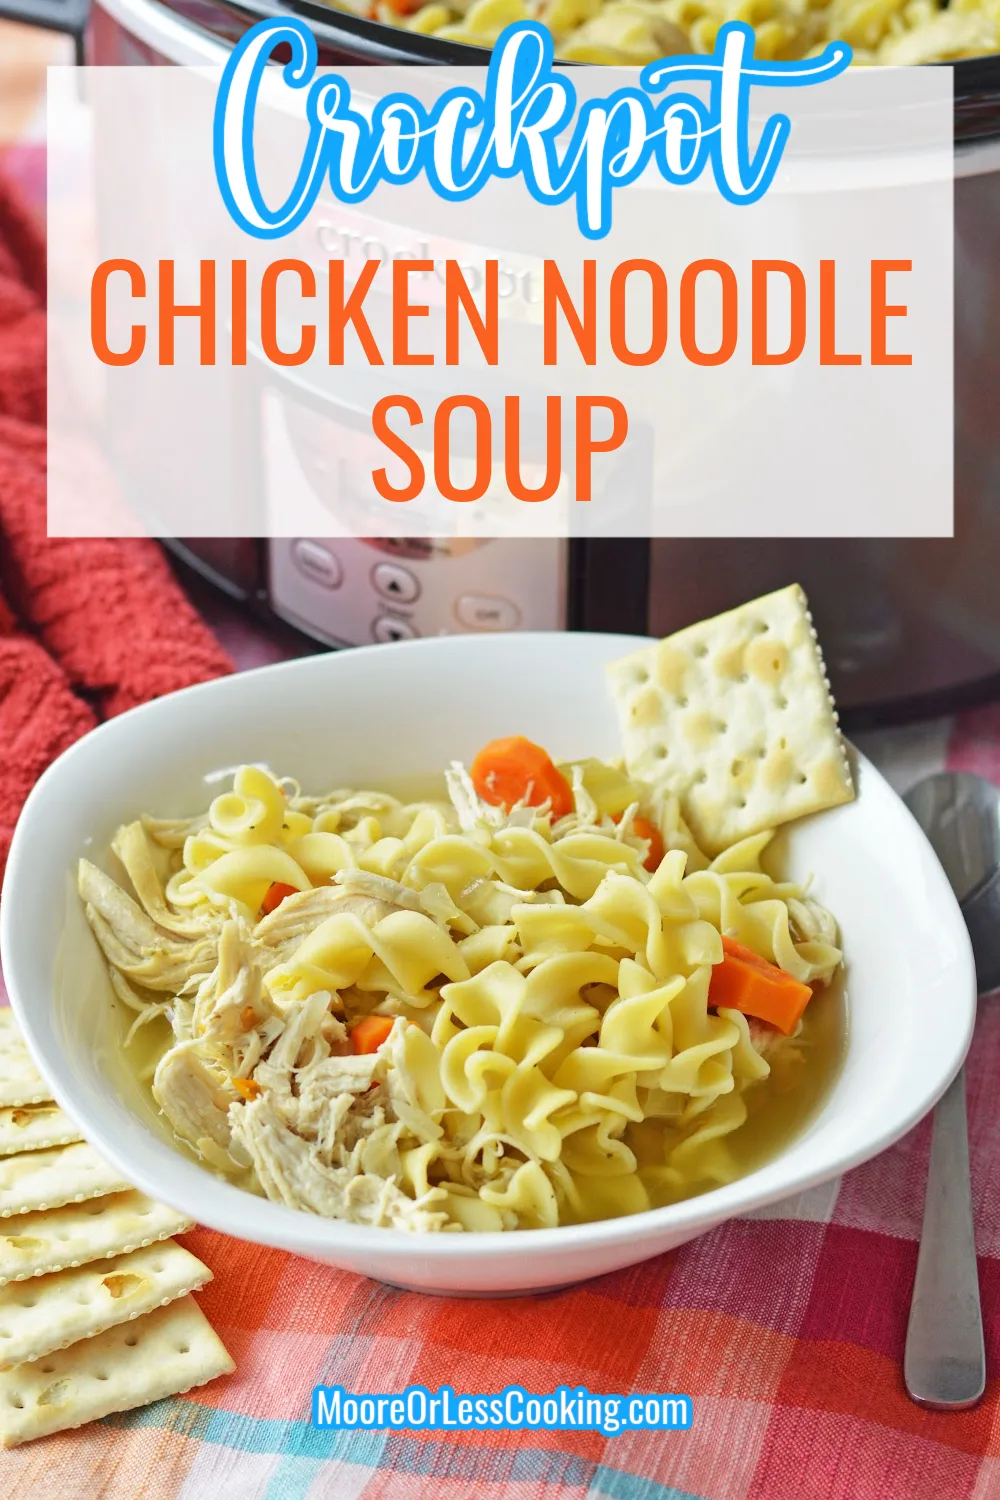 Made from scratch, this Crockpot Chicken Noodle Soup is pure comfort food that's full of delicious and classic flavors. It's an easy dump-and-go recipe made with chicken, veggies, and noodles, all in a savory broth. via @Mooreorlesscook